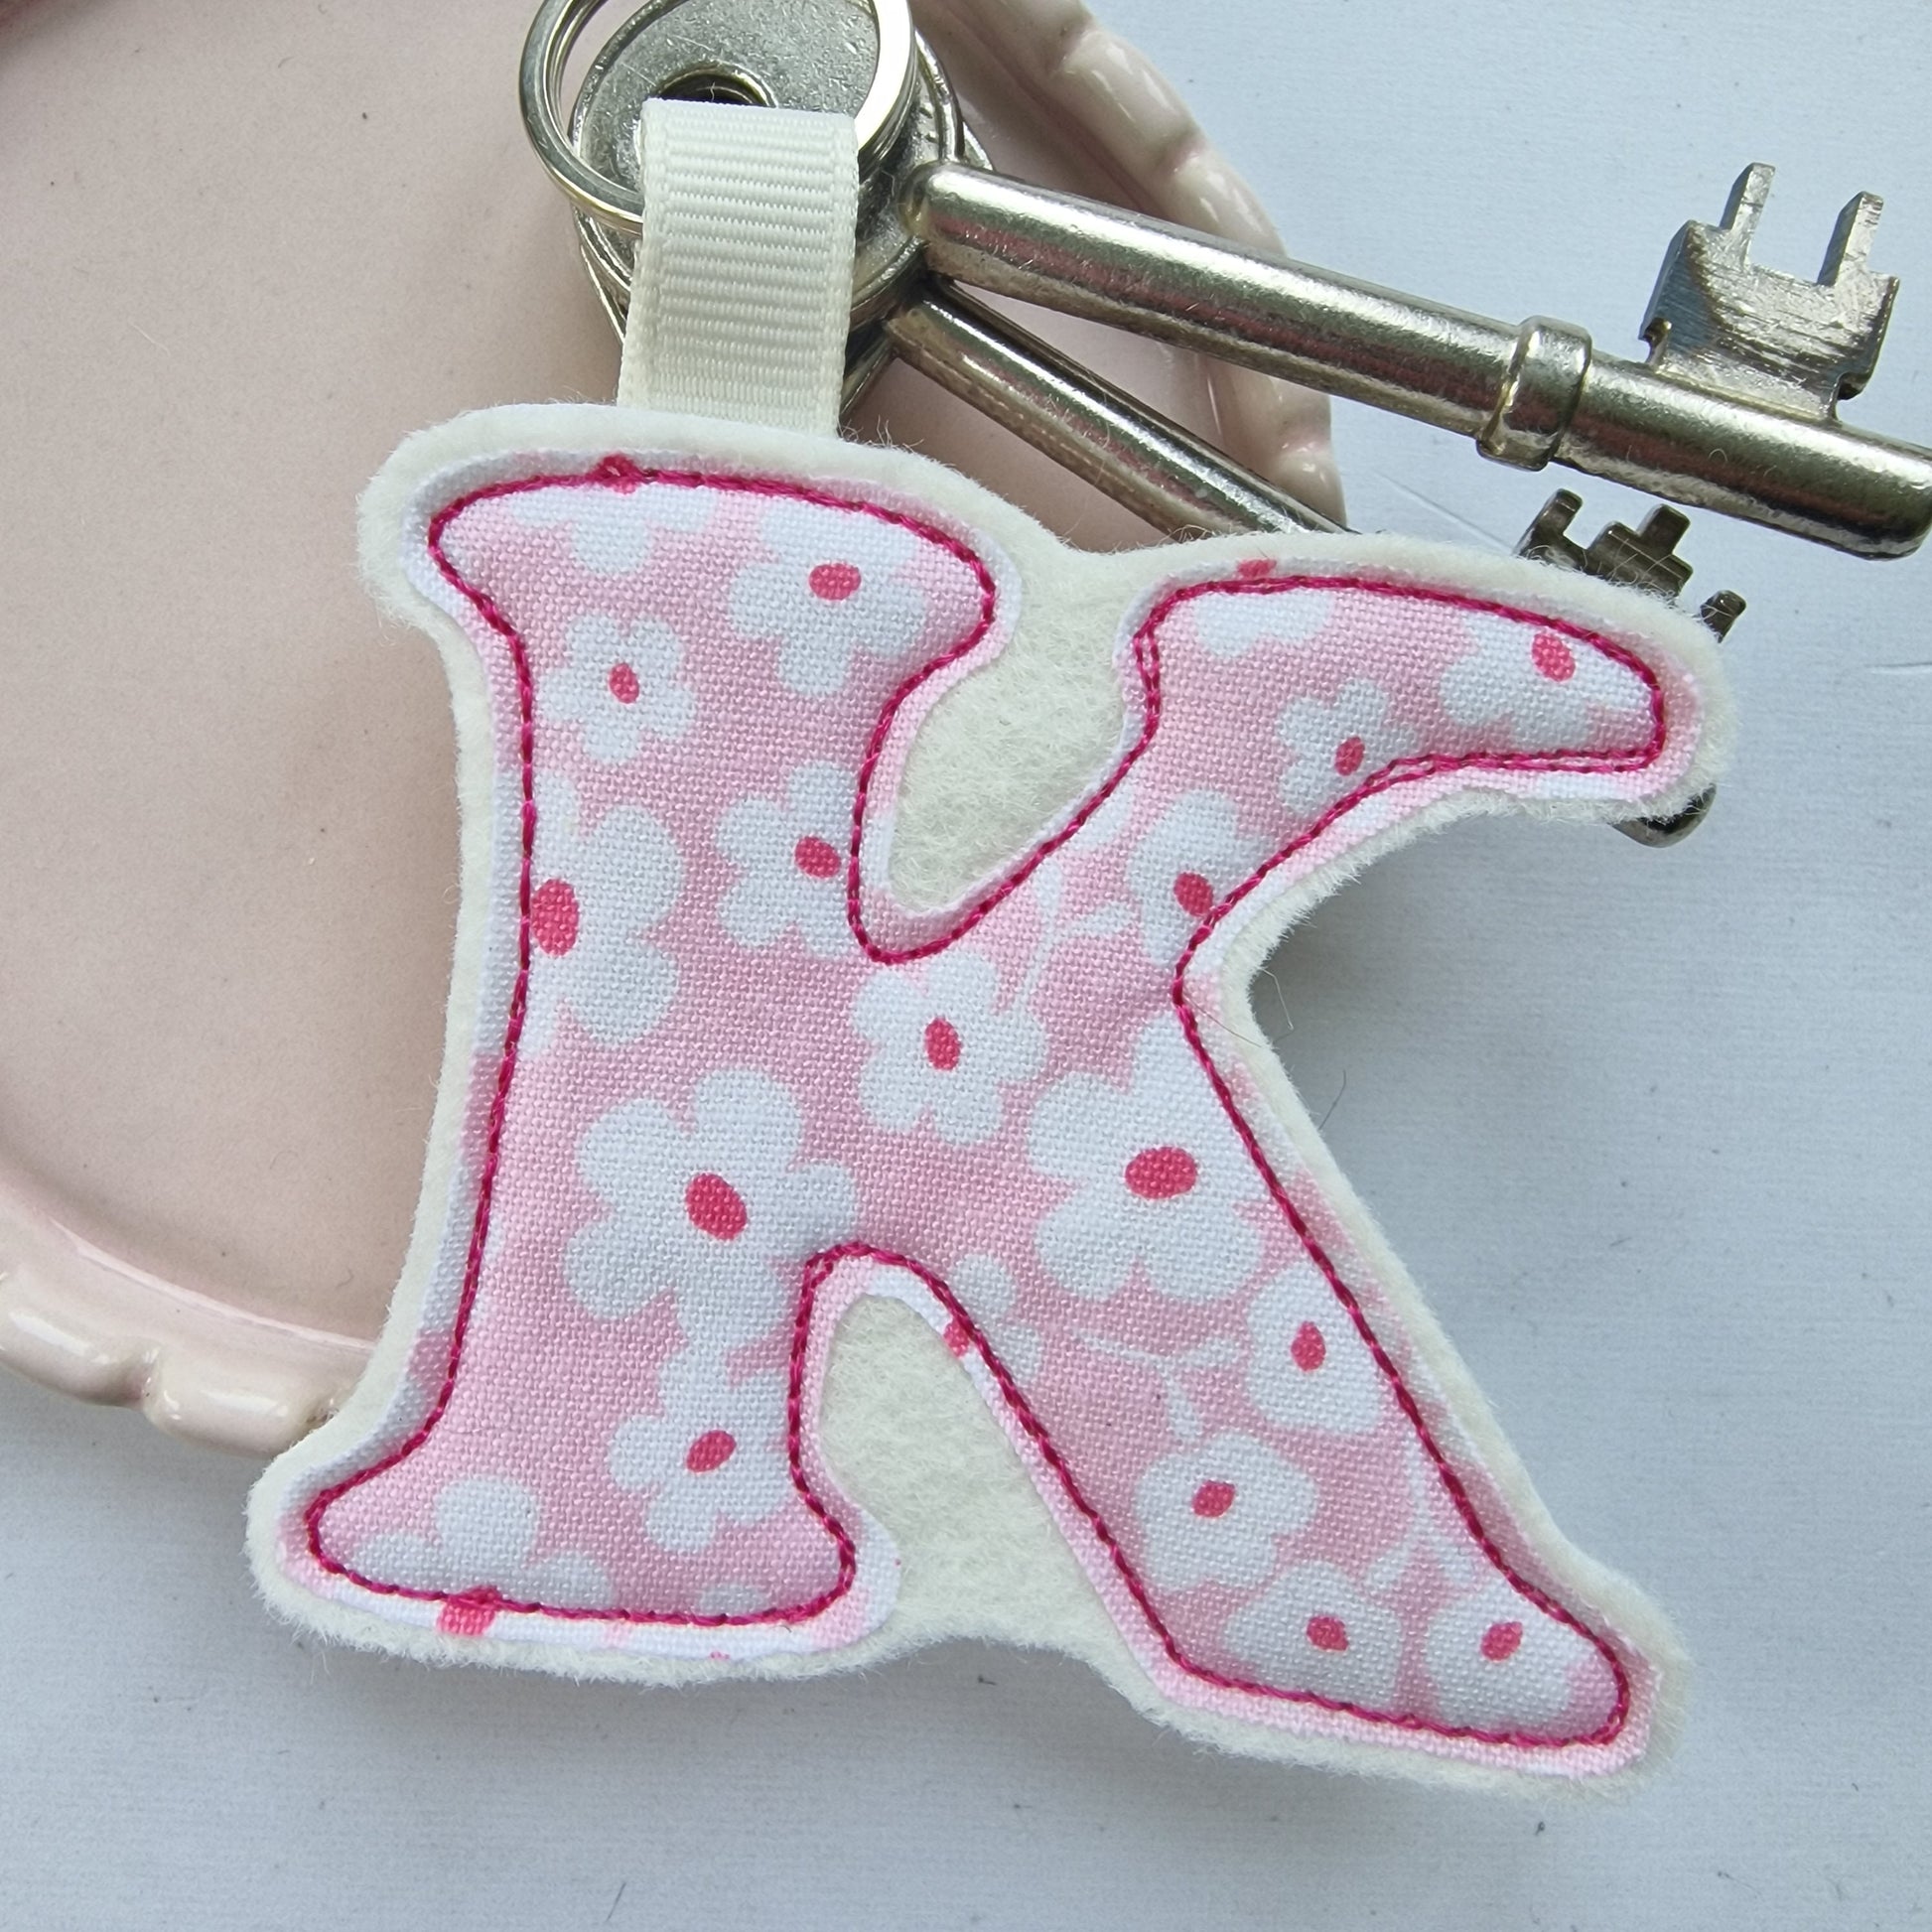 Decoration - Initial KEYRING (all Fabric Options)